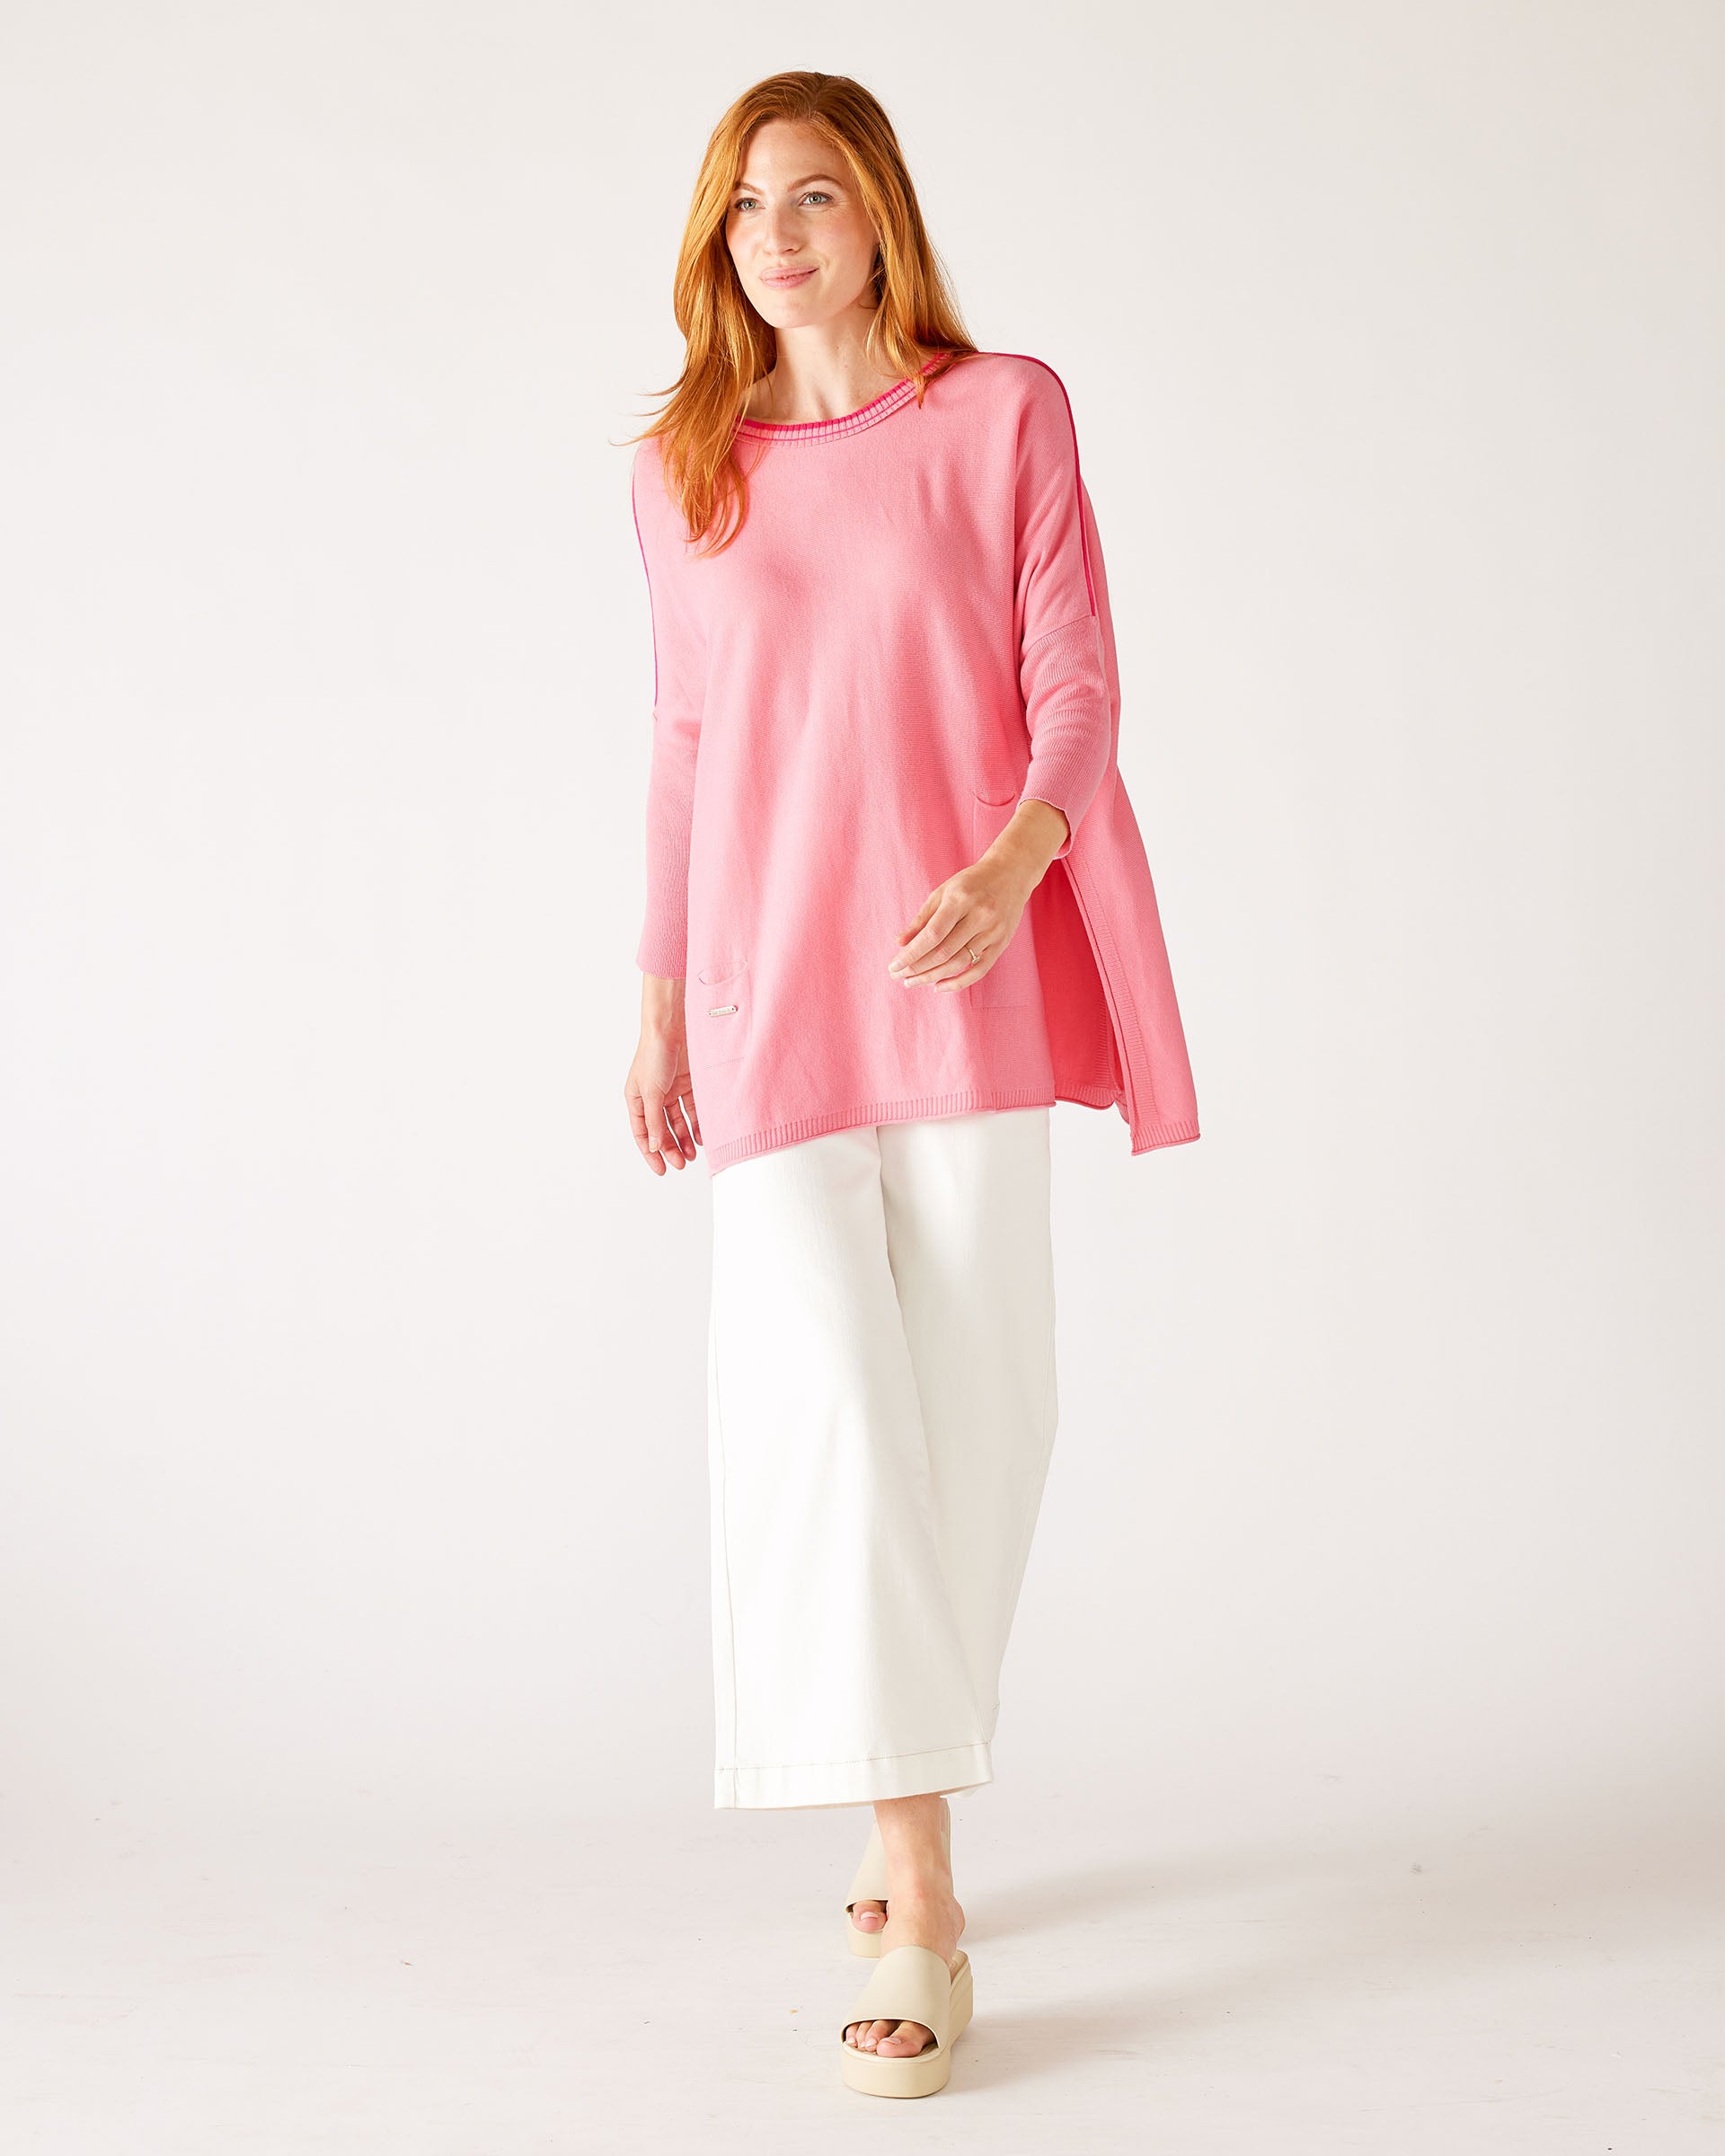 Women's Oversized Crewneck Knit Sweater in Pink Contrast Chest View